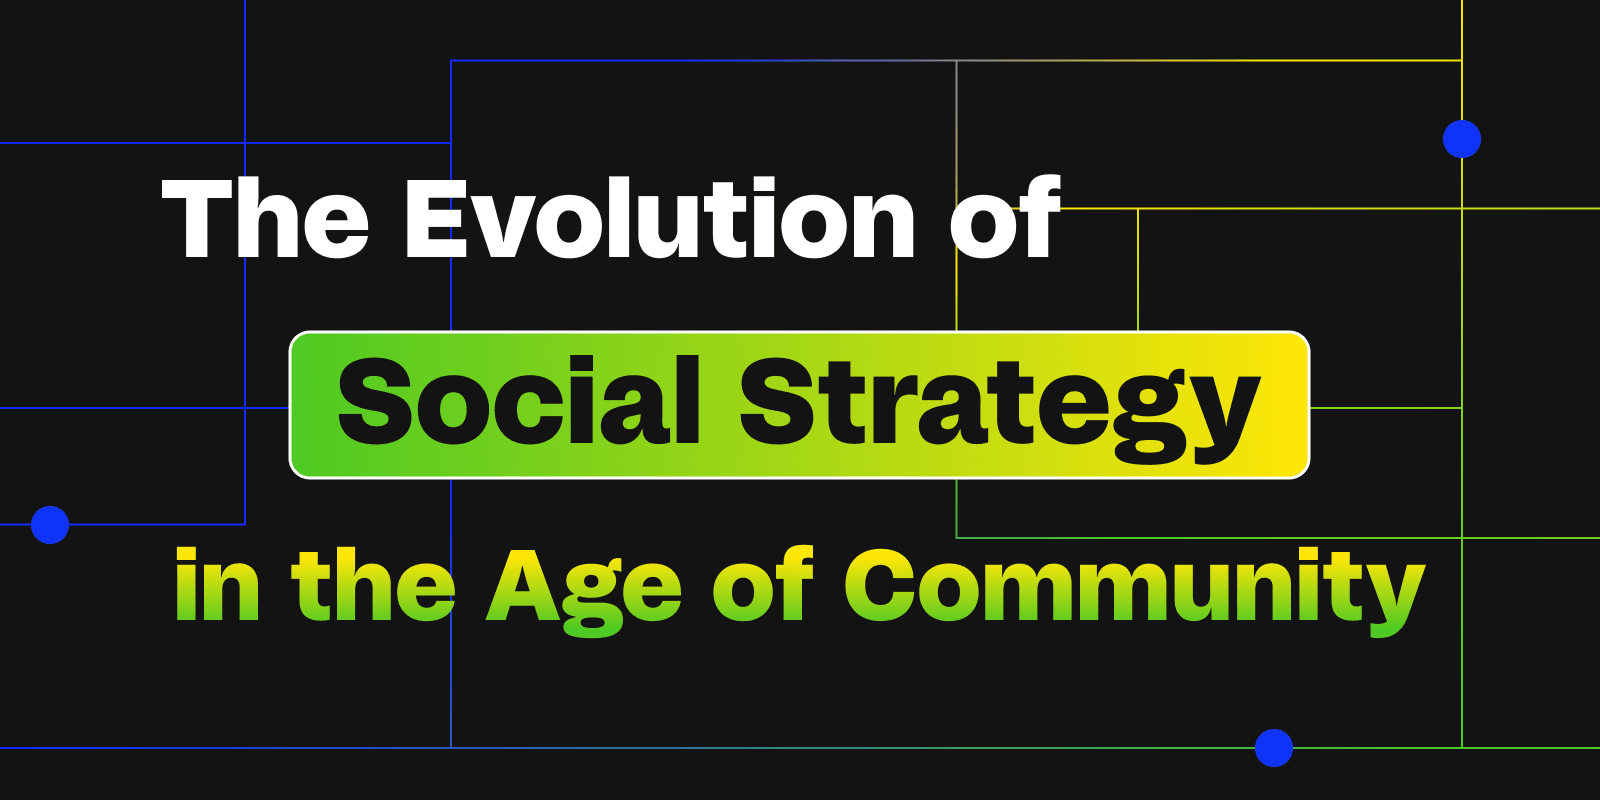 The Evolution of Social Strategy in the Age of Community